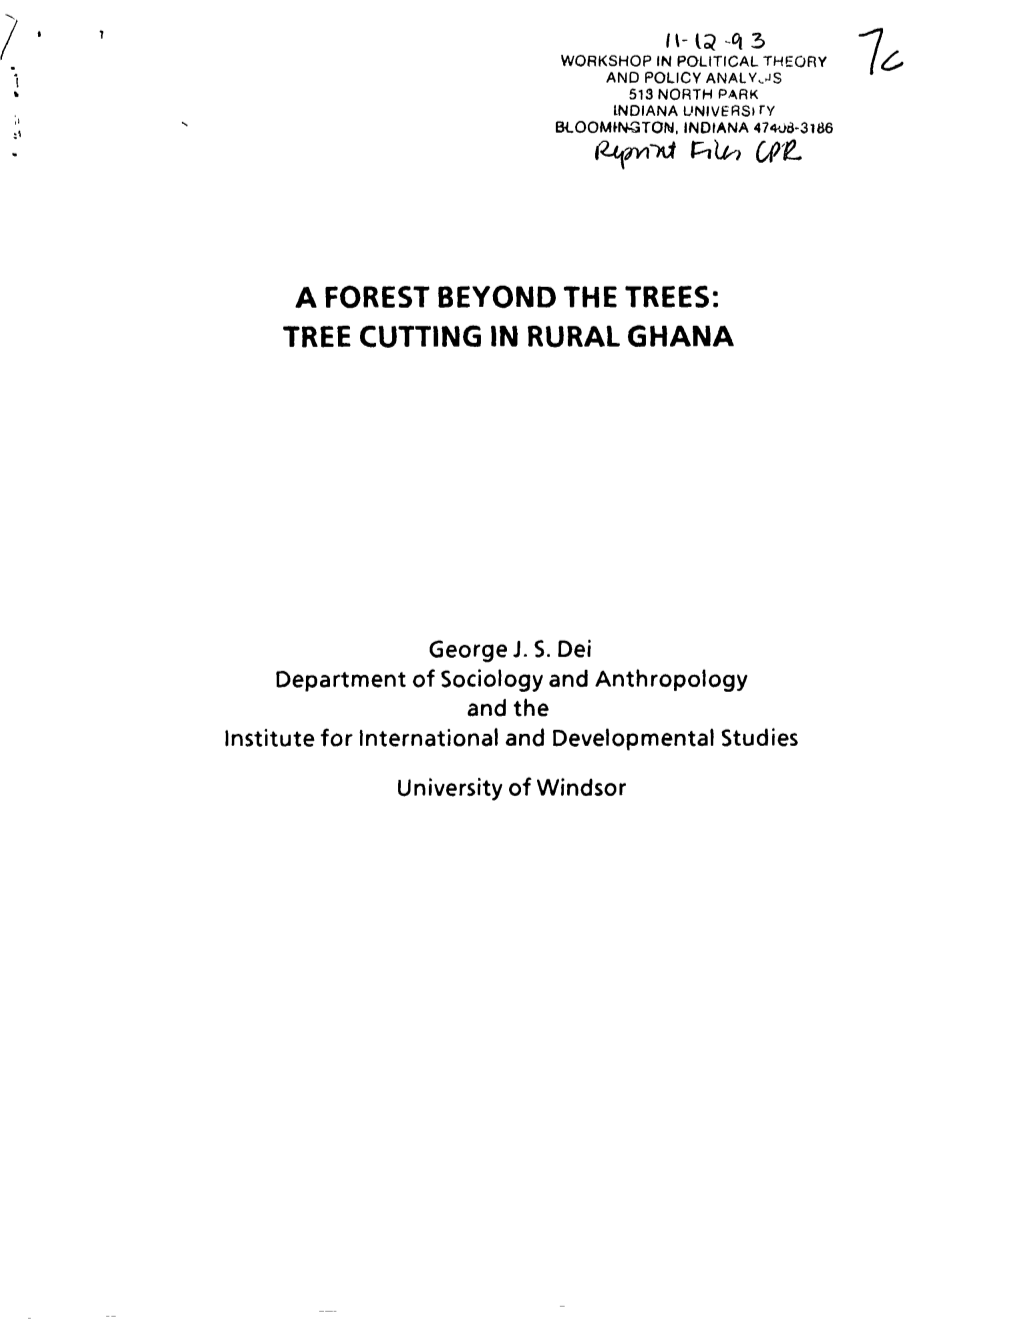 A Forest Beyond the Trees: Tree Cutting in Rural Ghana